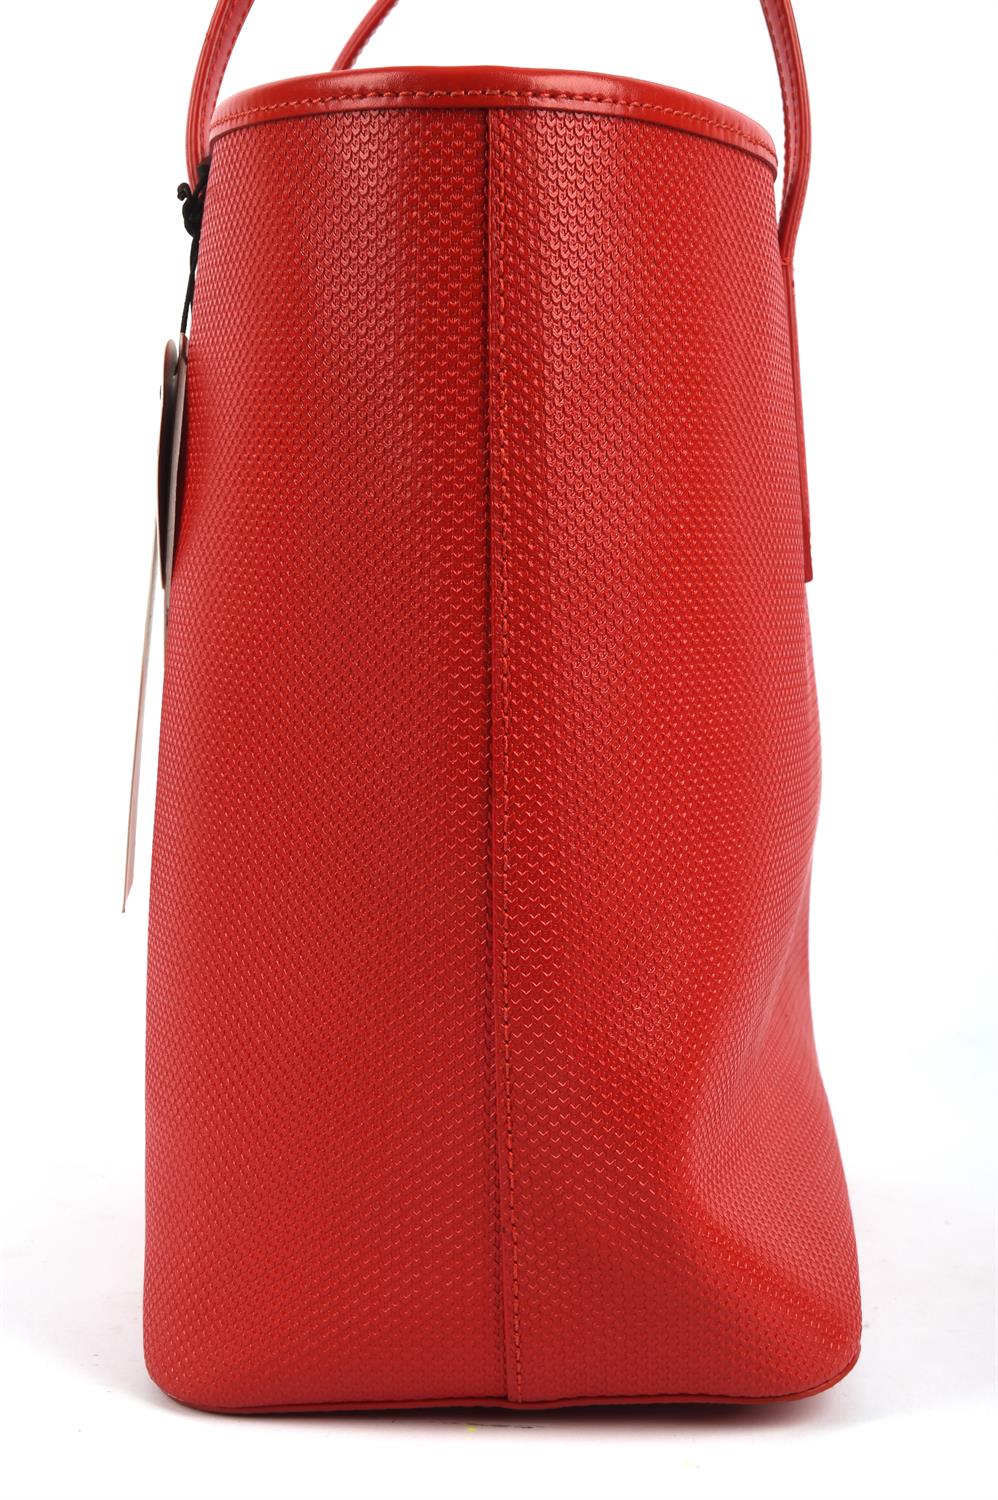 LACOSTE zipped "High Risk Red" split leather tote shopping bag (29cm x 29cm x 6cm) - Image 2 of 6